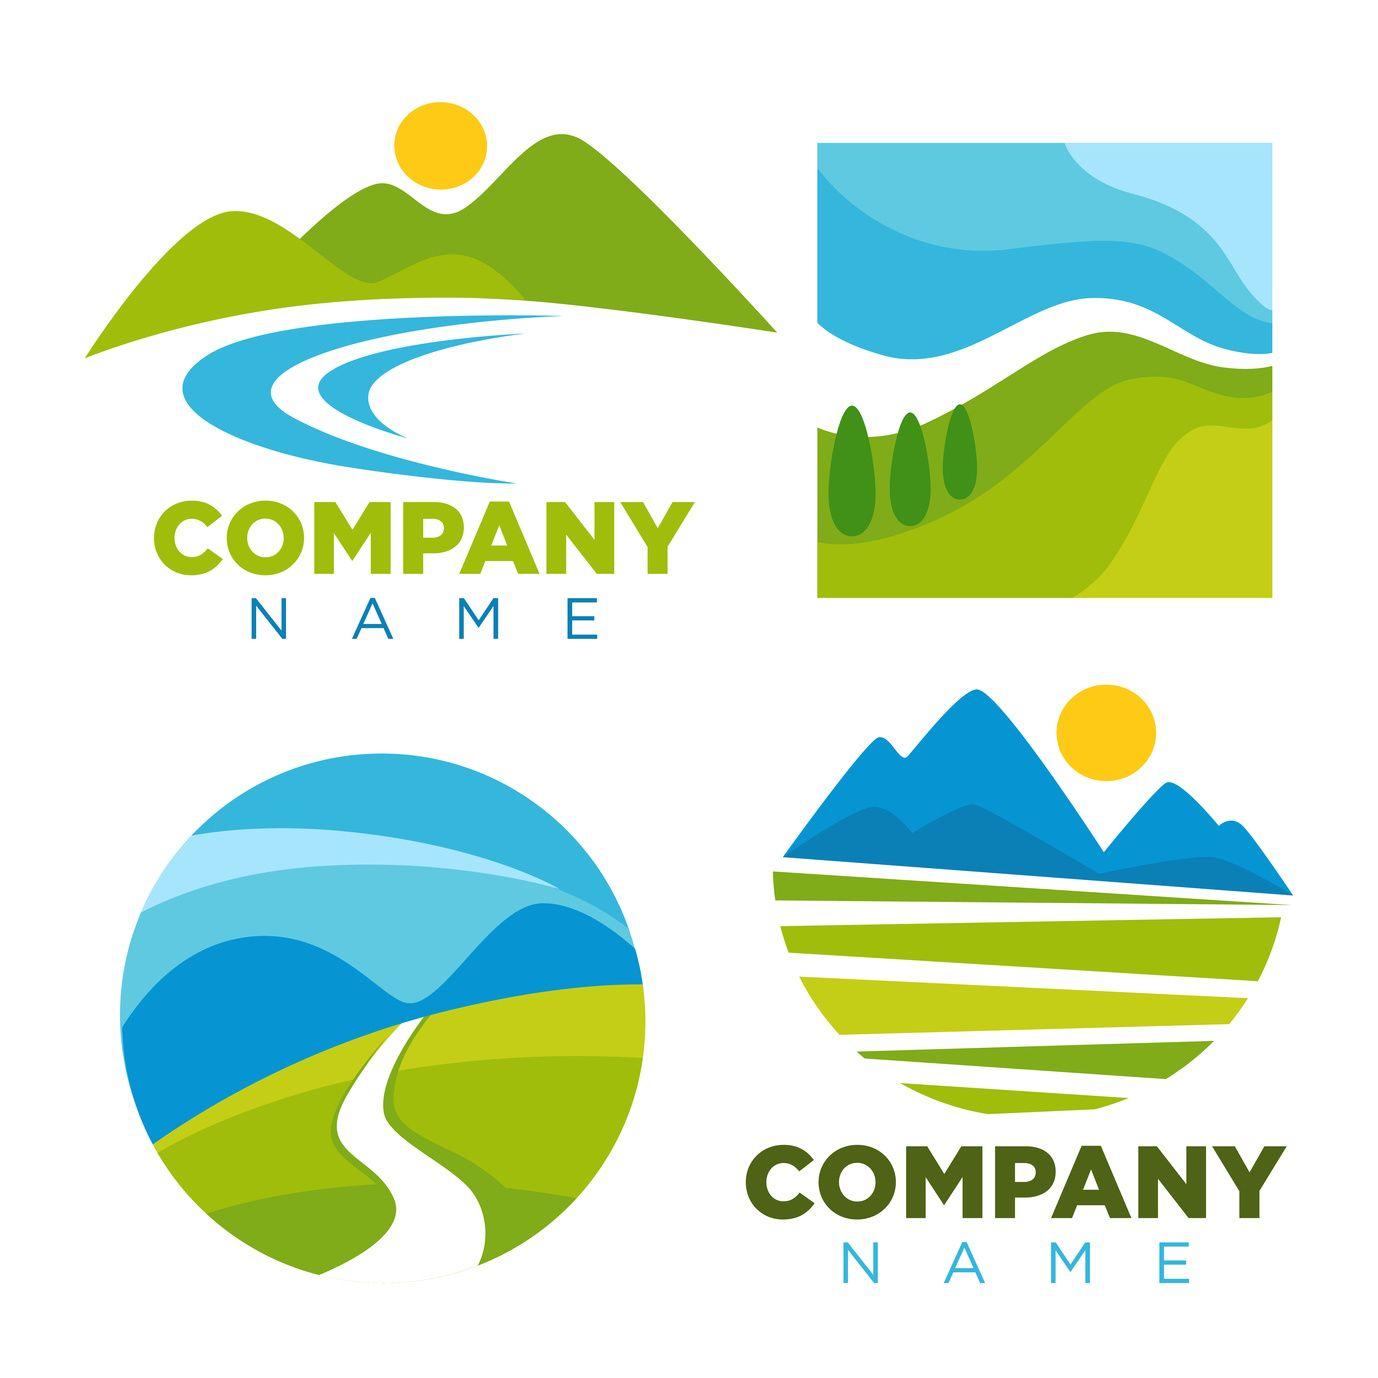 Popular Company Logo - Popular Company Logos Aren't Accidental: Here's Why & Tips to You